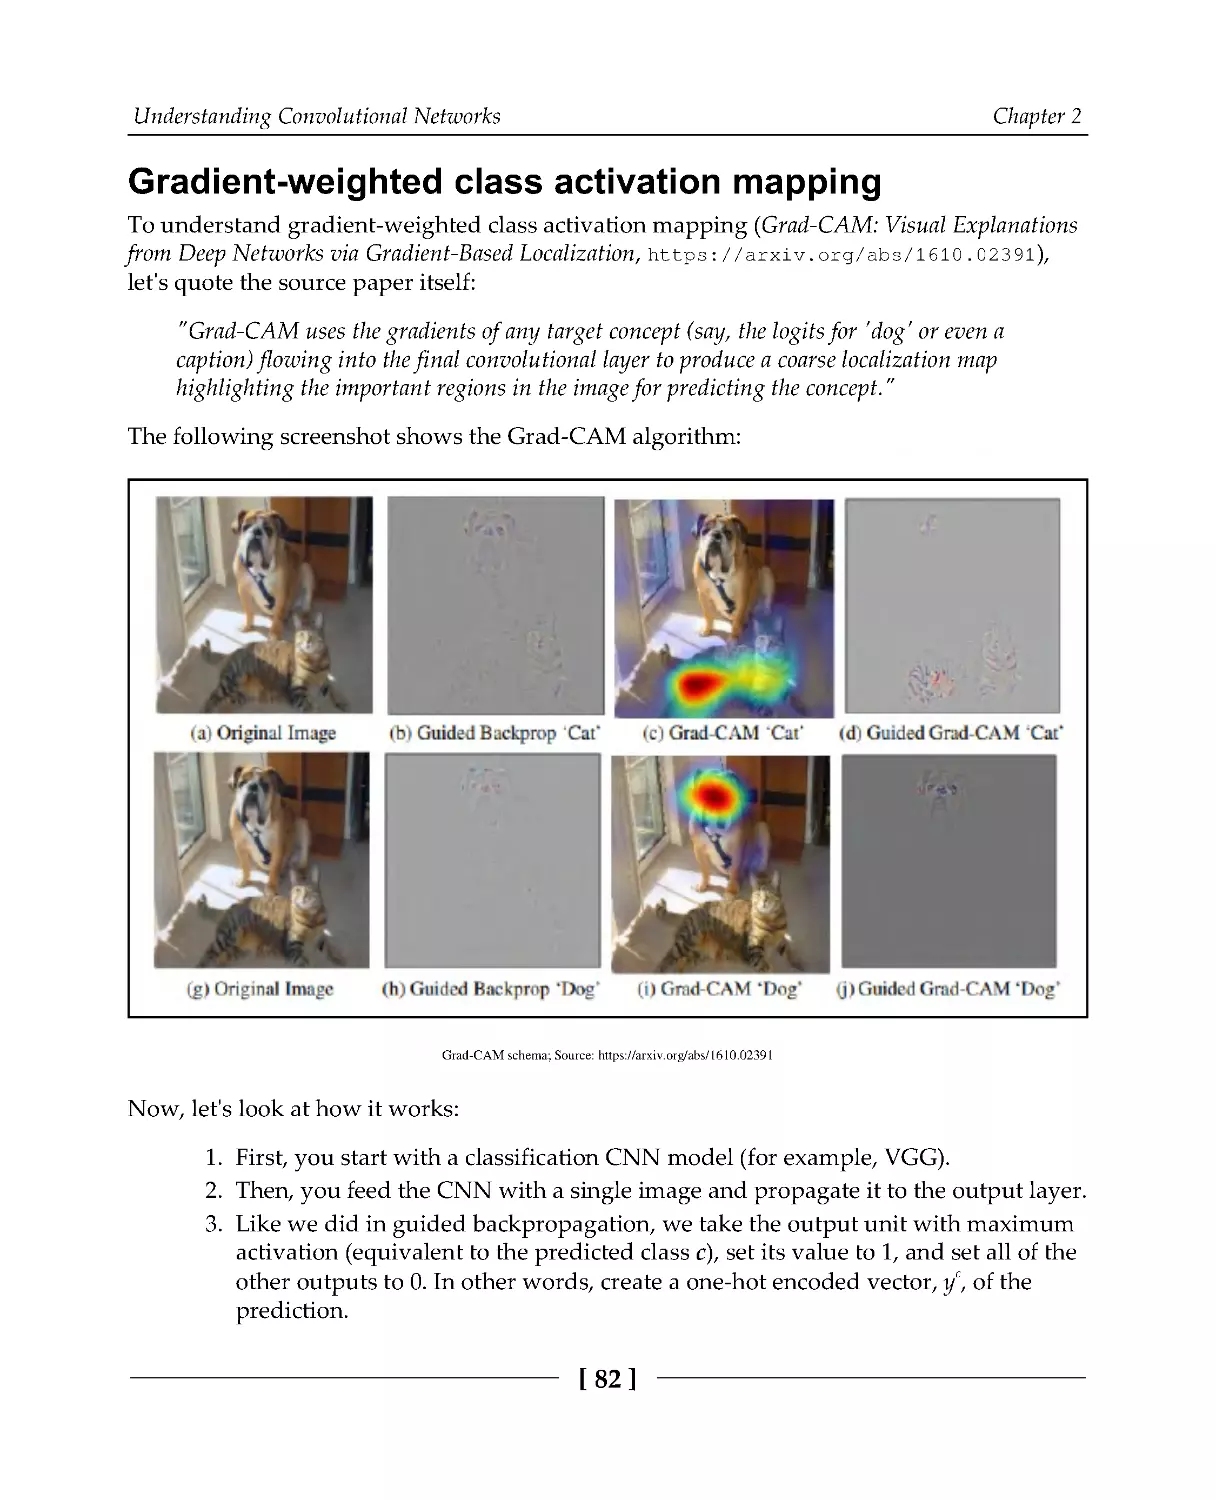 Gradient-weighted class activation mapping